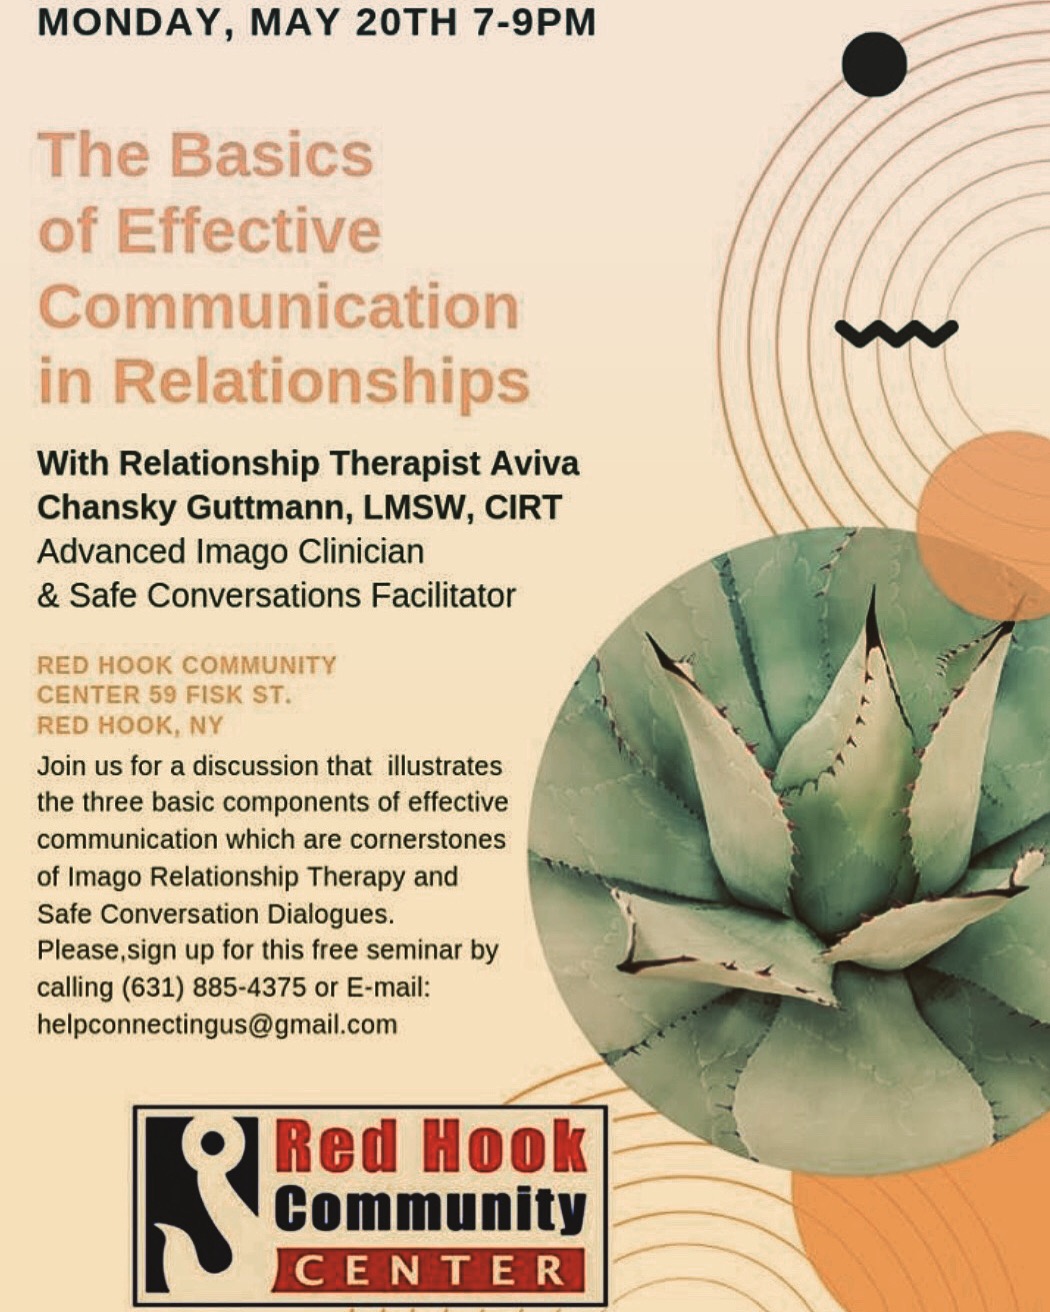 Free Communication Skills Workshop at Red Hook Community Center Monday 5/20/19 from 7-9PM 59 Fisk St, Red Hook, NY 12571